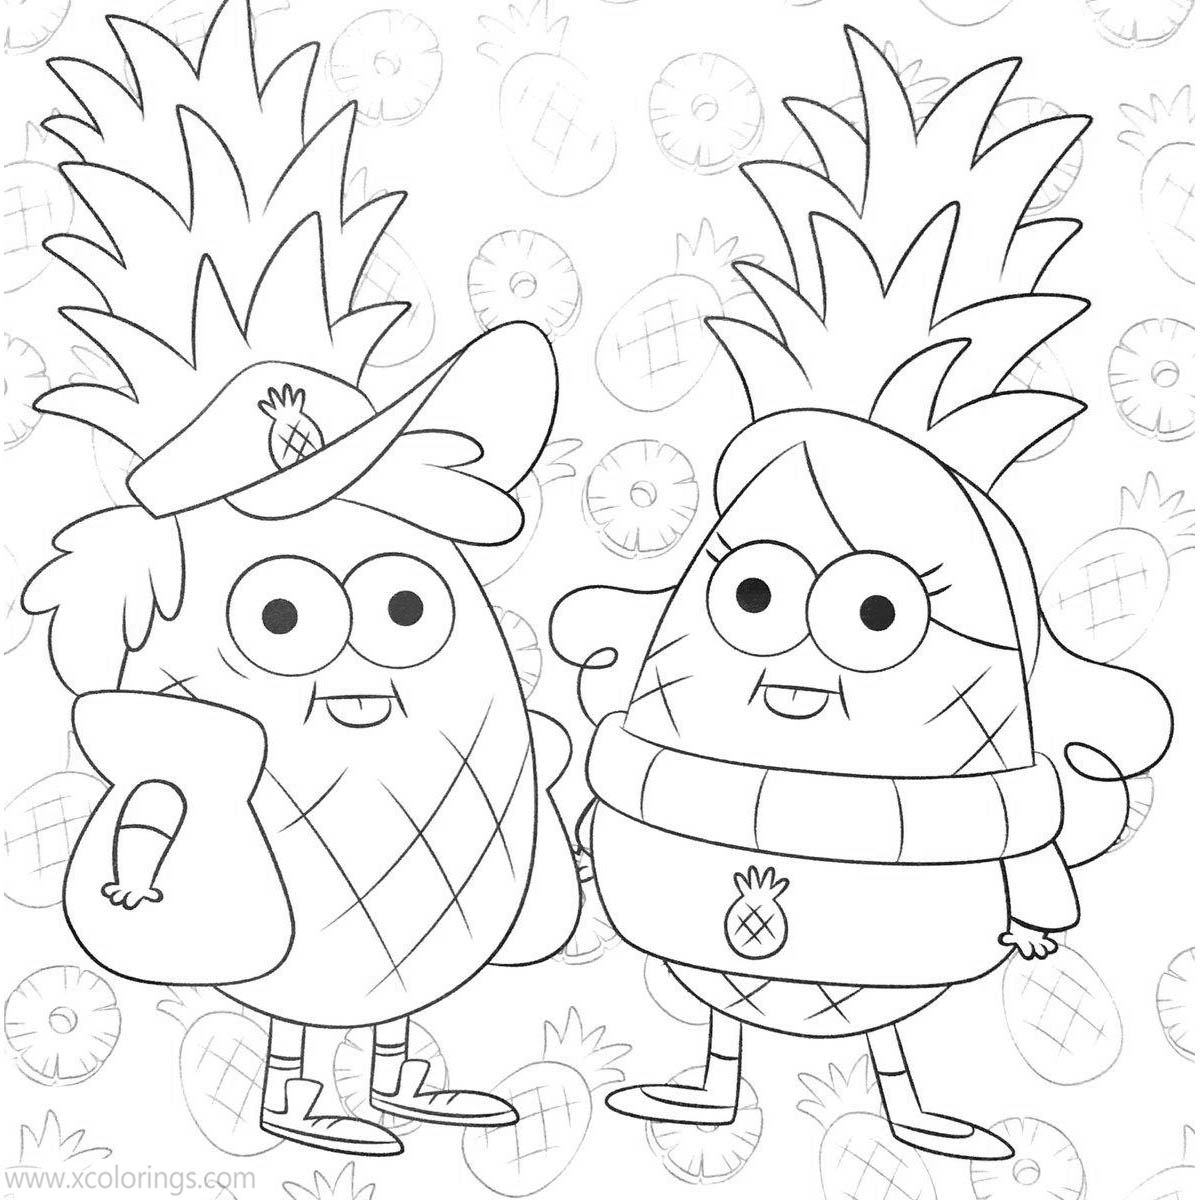 Free Gravity Falls Coloring Pages Mabel and Dipper as Pineapples printable